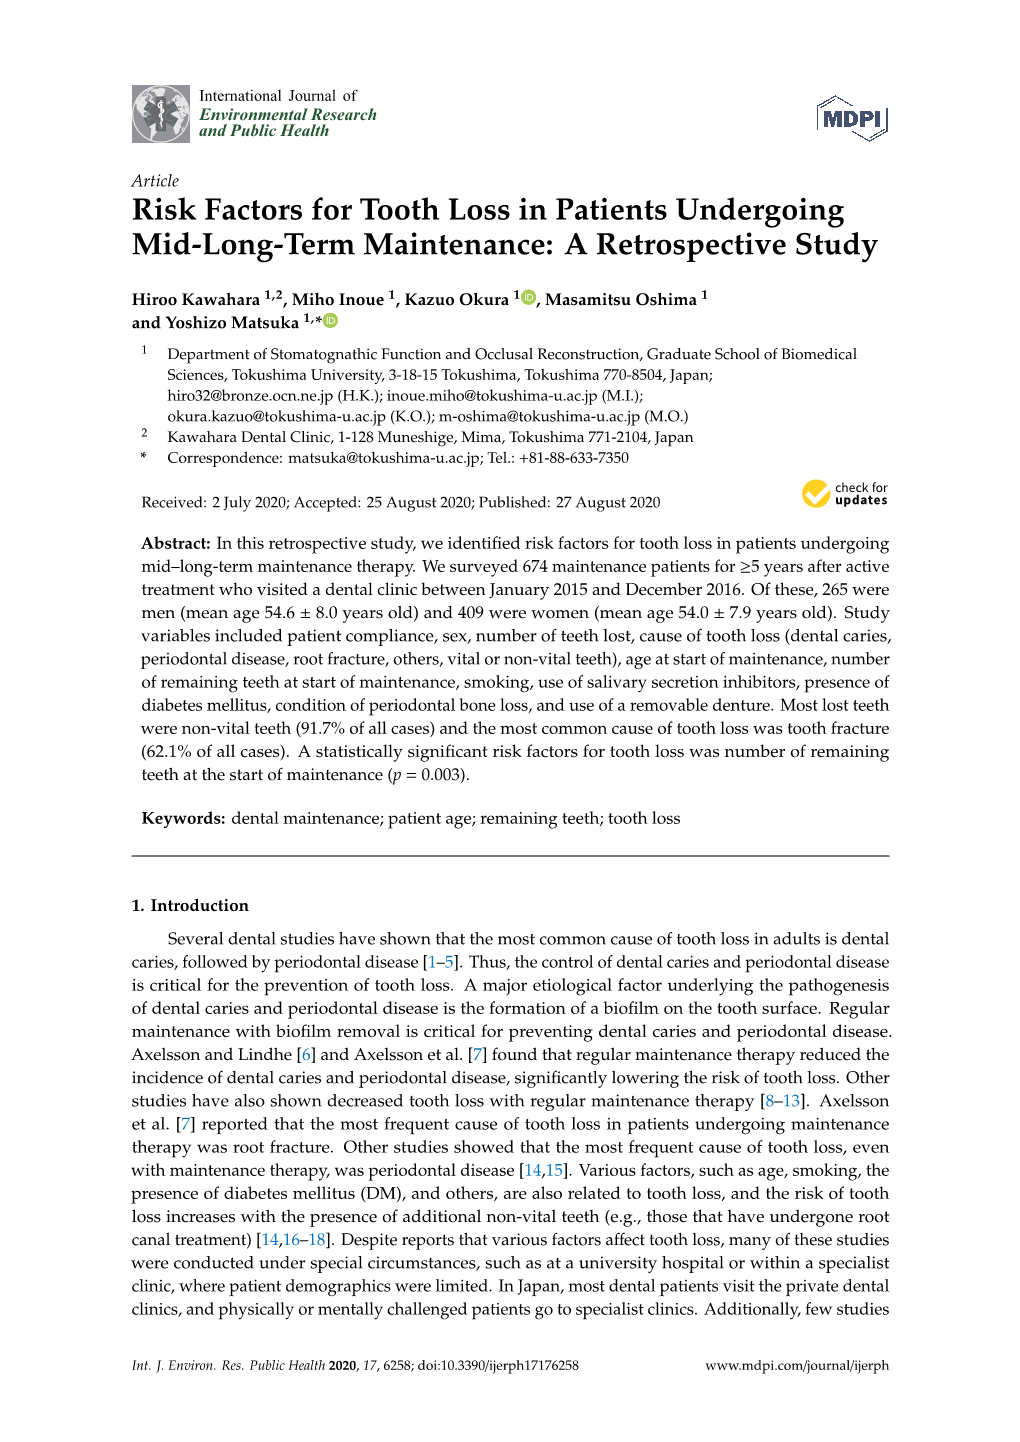 Risk Factors for Tooth Loss in Patients Undergoing Mid-Long-Term Maintenance: a Retrospective Study